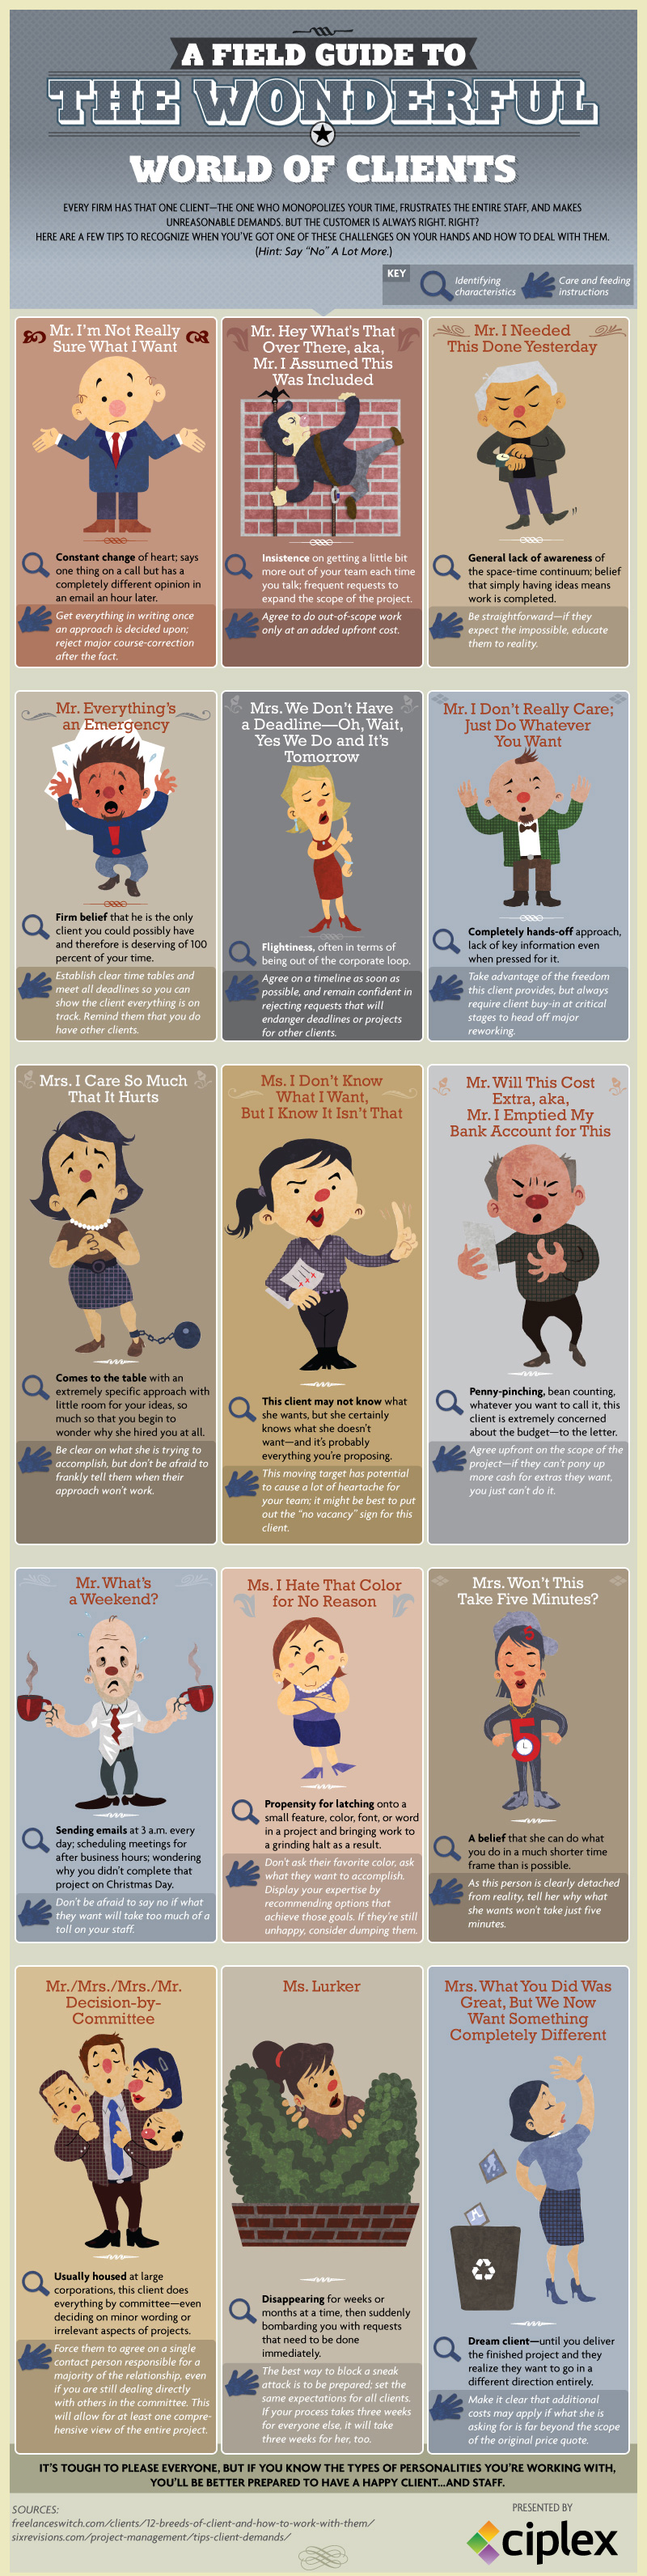 How To Identify and Deal With Different Types Of Clients - 15 Different Types of Clients